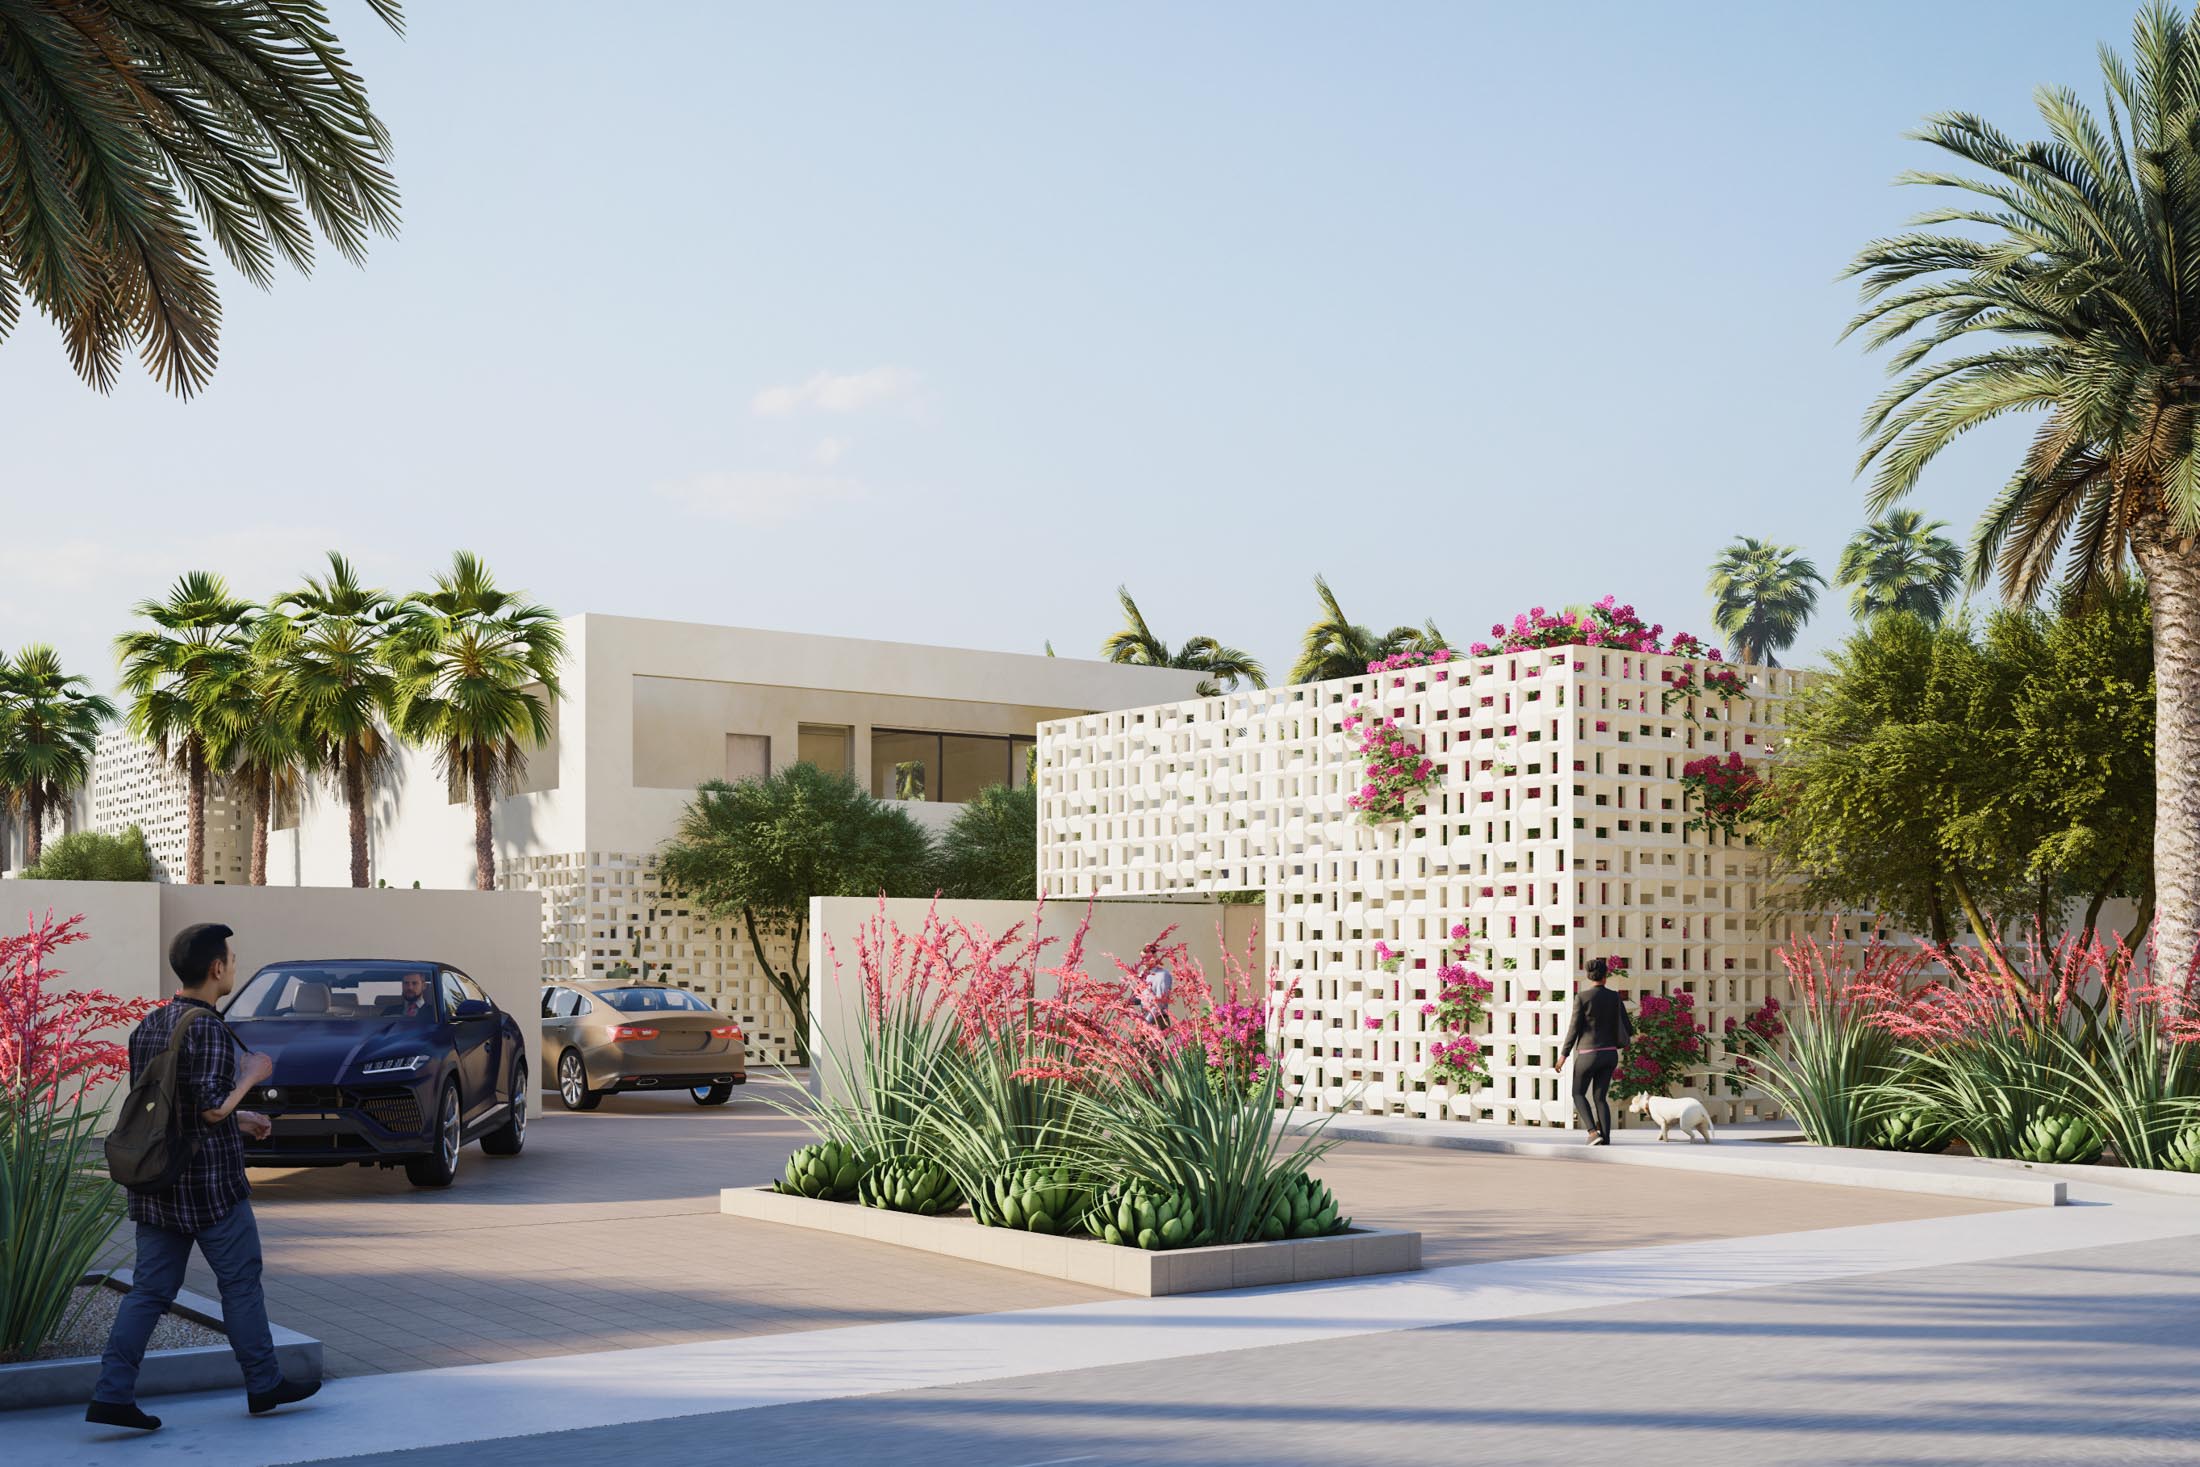 Rendering of the Palm Canyon residences with the Brise Blocks design providing privacy at the front entrance